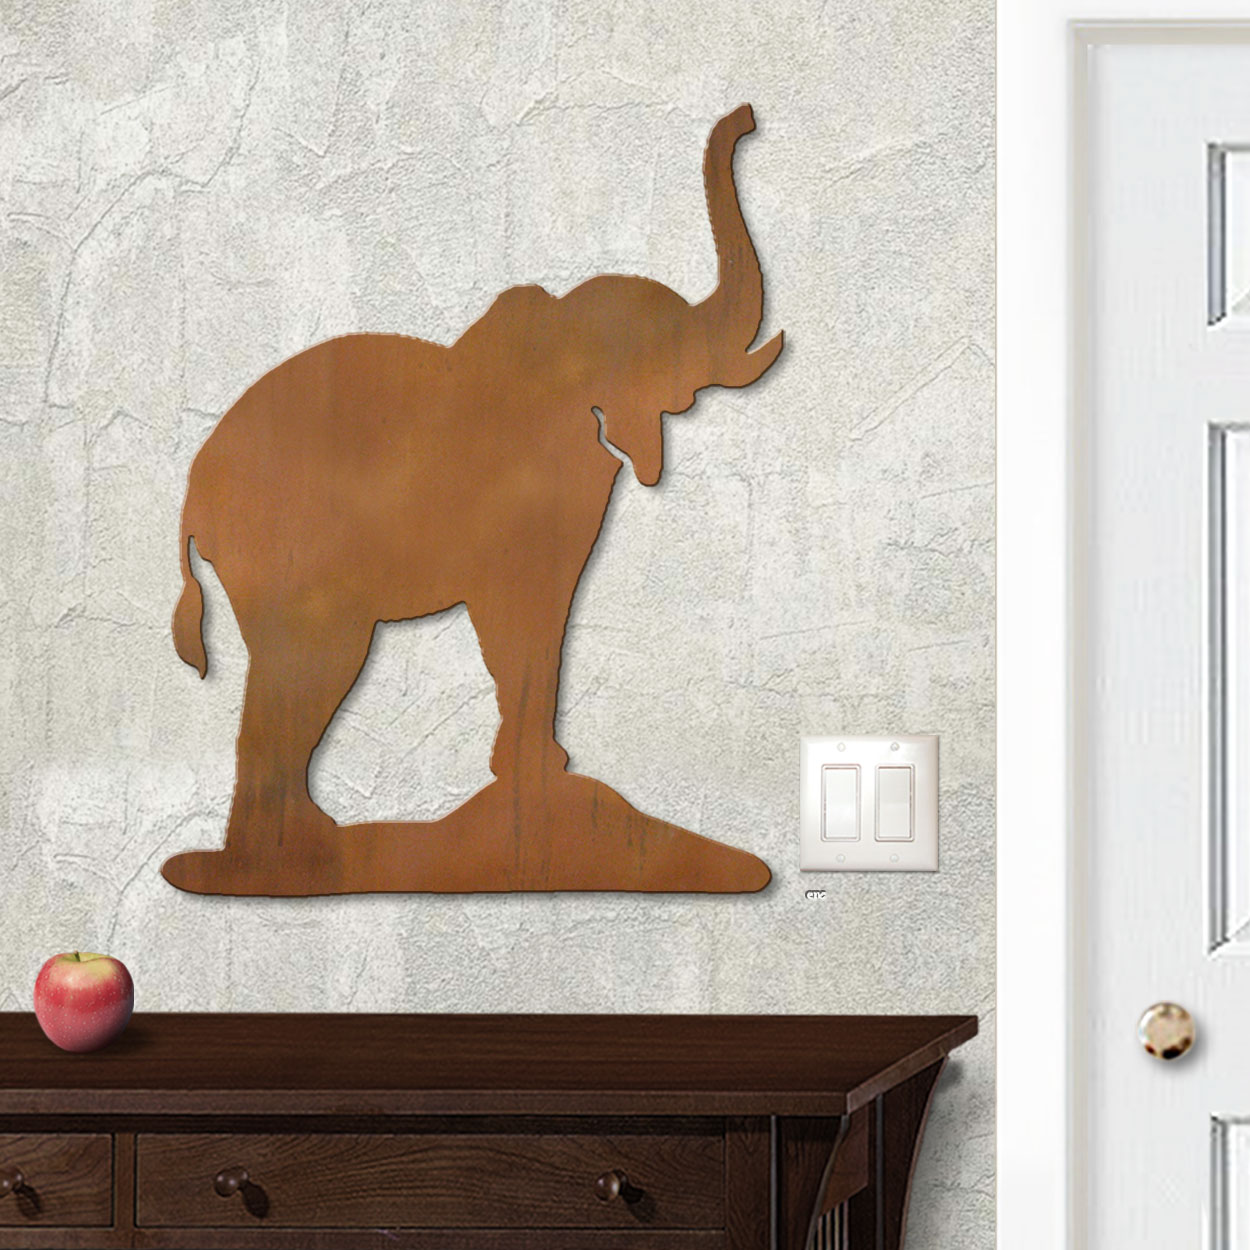 625426r - 18in or 24in Floating Metal Wall Art - Elephant - Rust Patina